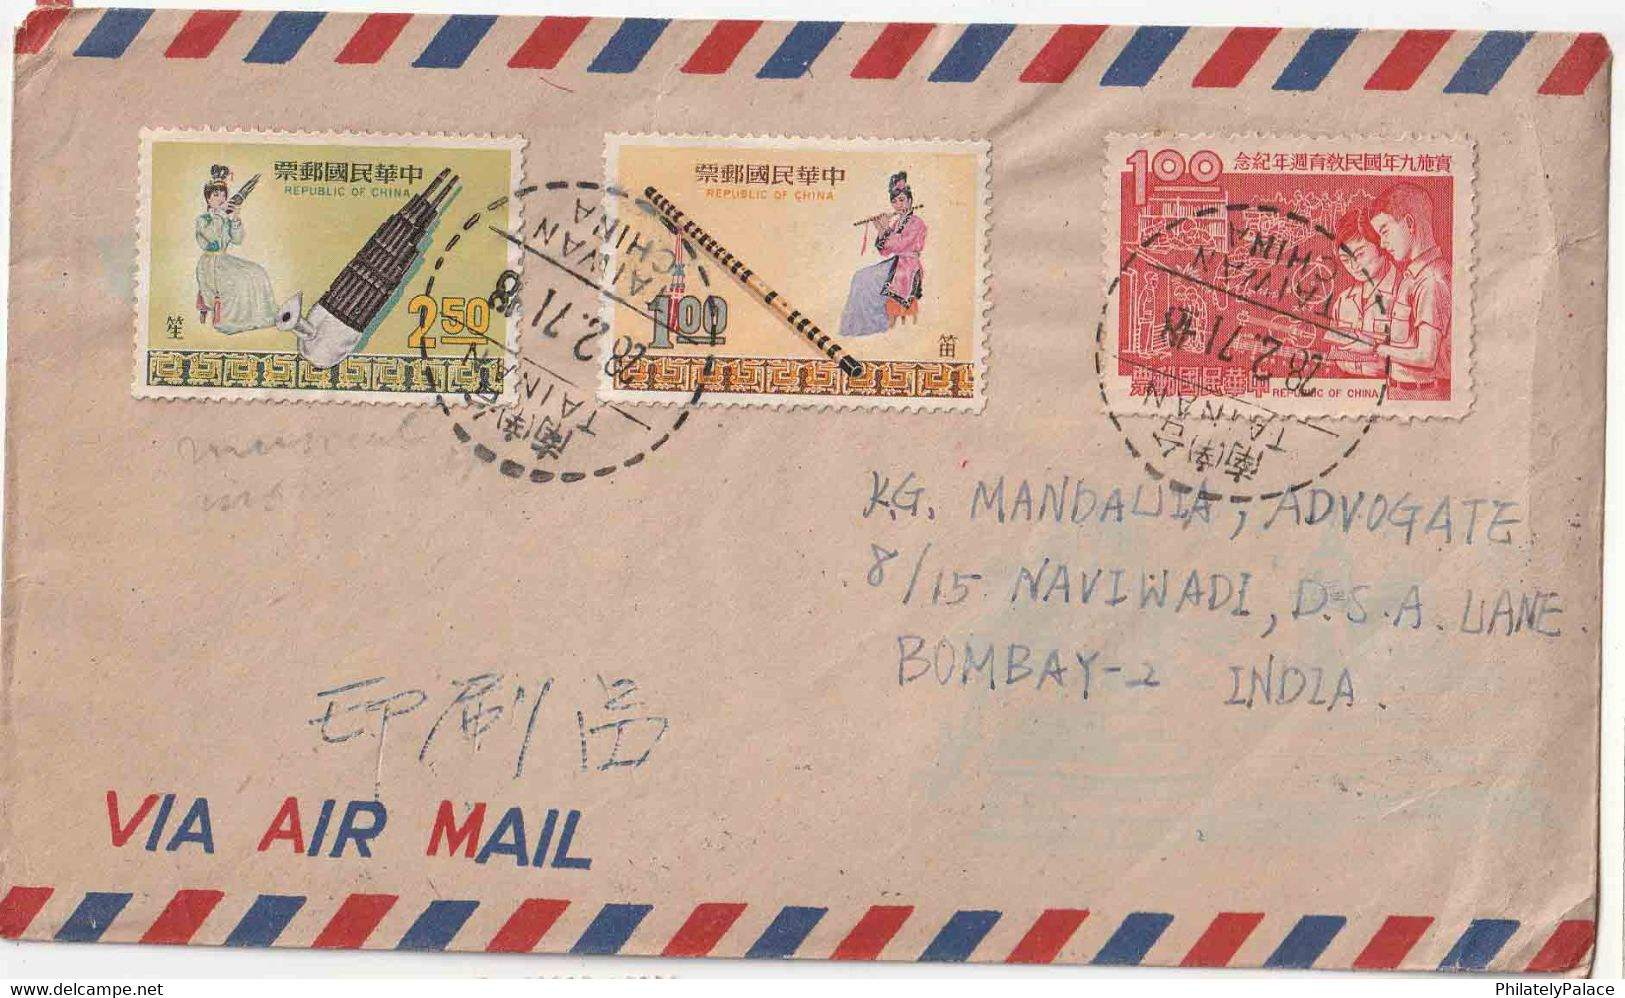 REPUBLIC OF CHINA 1971 AIRMAIL COVER 3 DIFF. STAMPS MUSIC TAINAN CHINA TO INDIA (**) - Covers & Documents